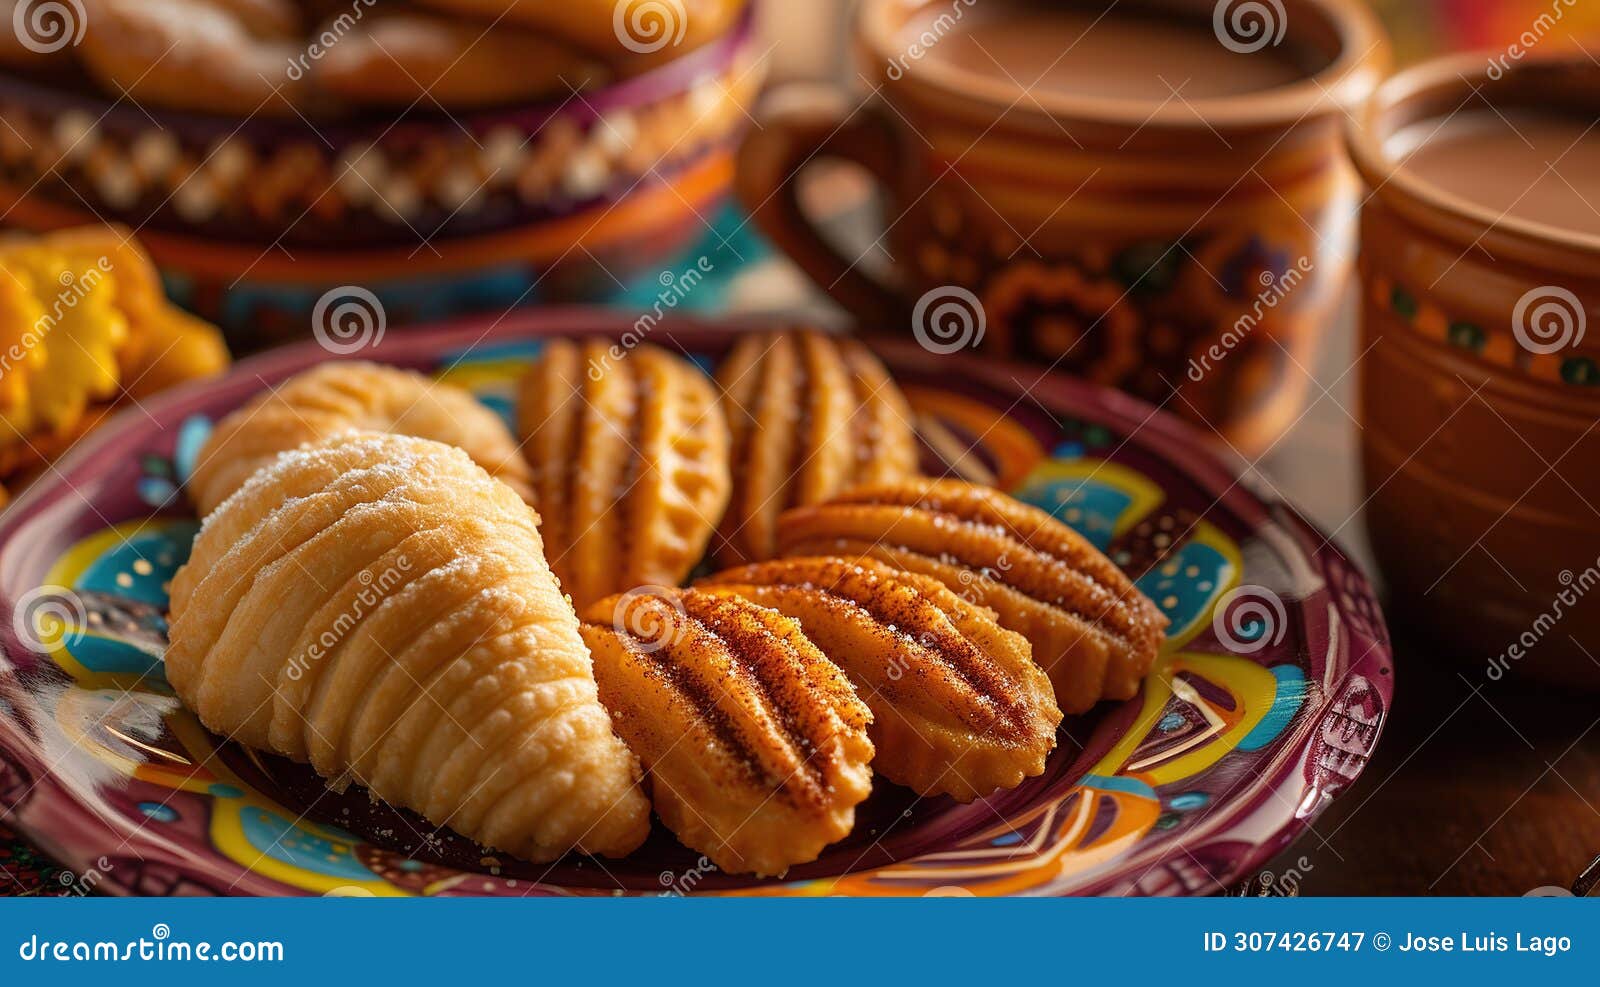 traditional mexican sweet bread and hot chocolate